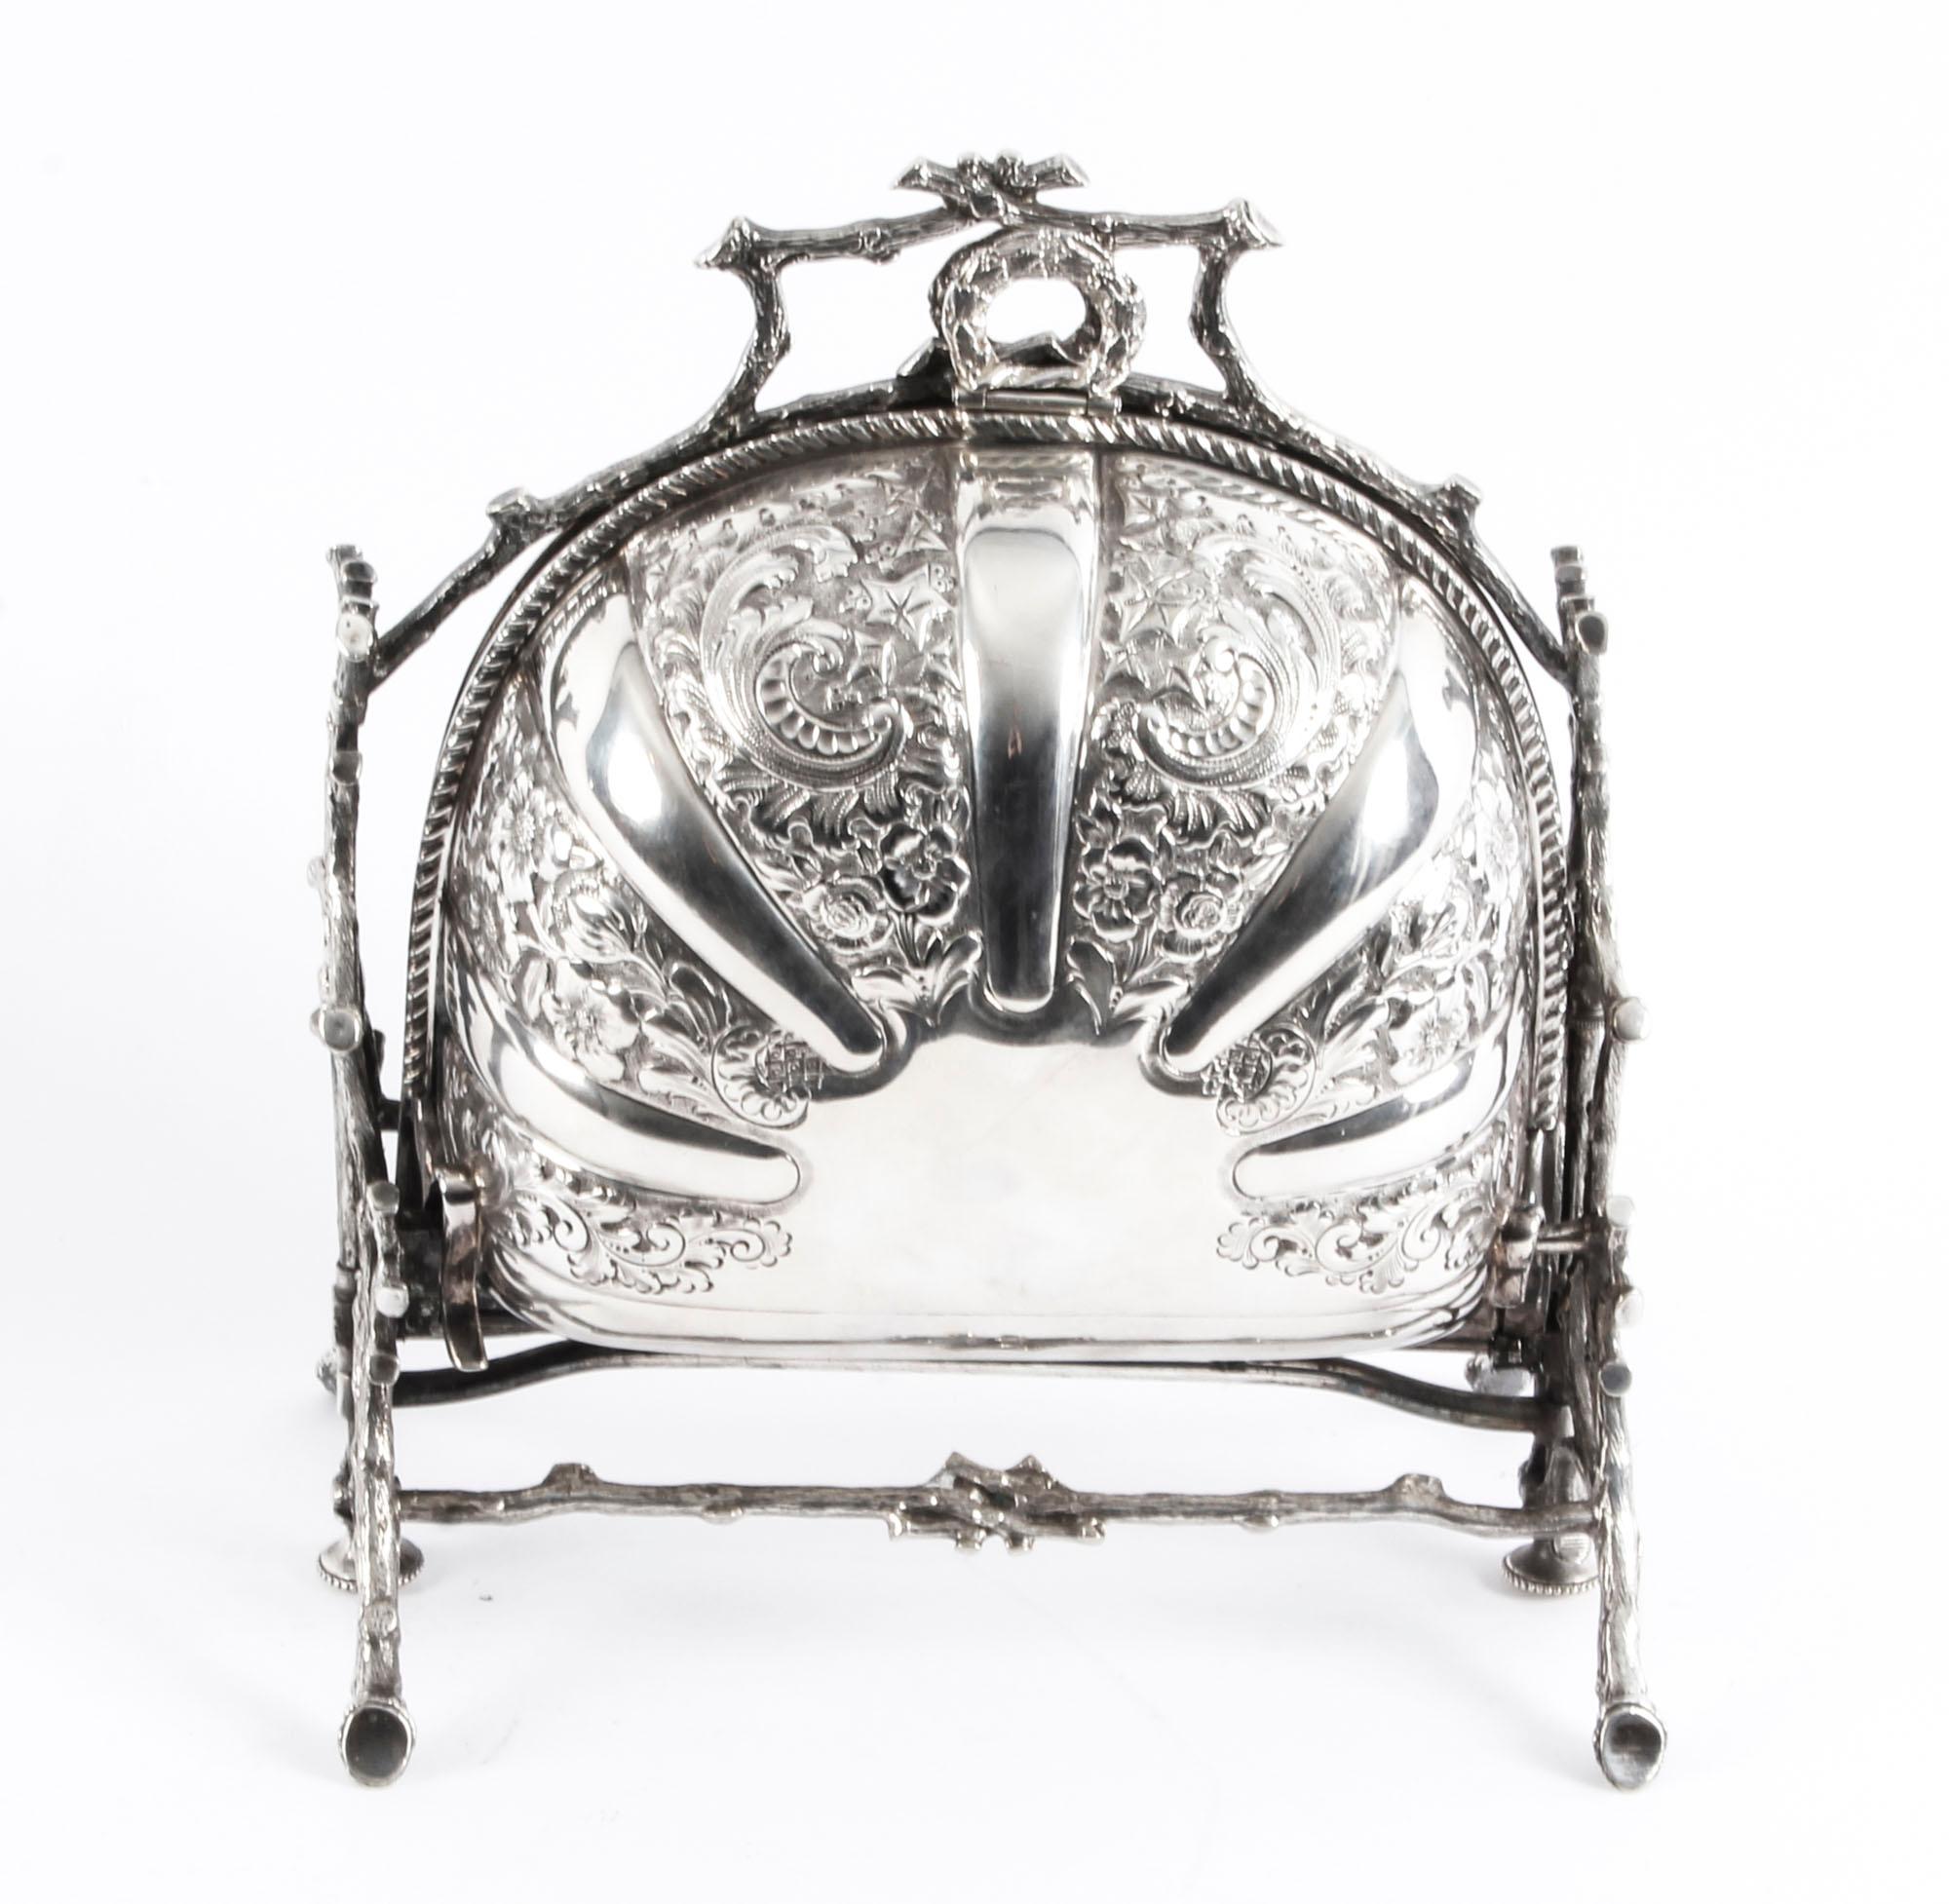 This is a truly superb and highly decorative antique Victorian silver plated folding biscuit box, circa 1895 in date.

This splendid biscuit box was superbly executed by the renowned silversmiths, The Alexander Clark Manufacturing, London, in